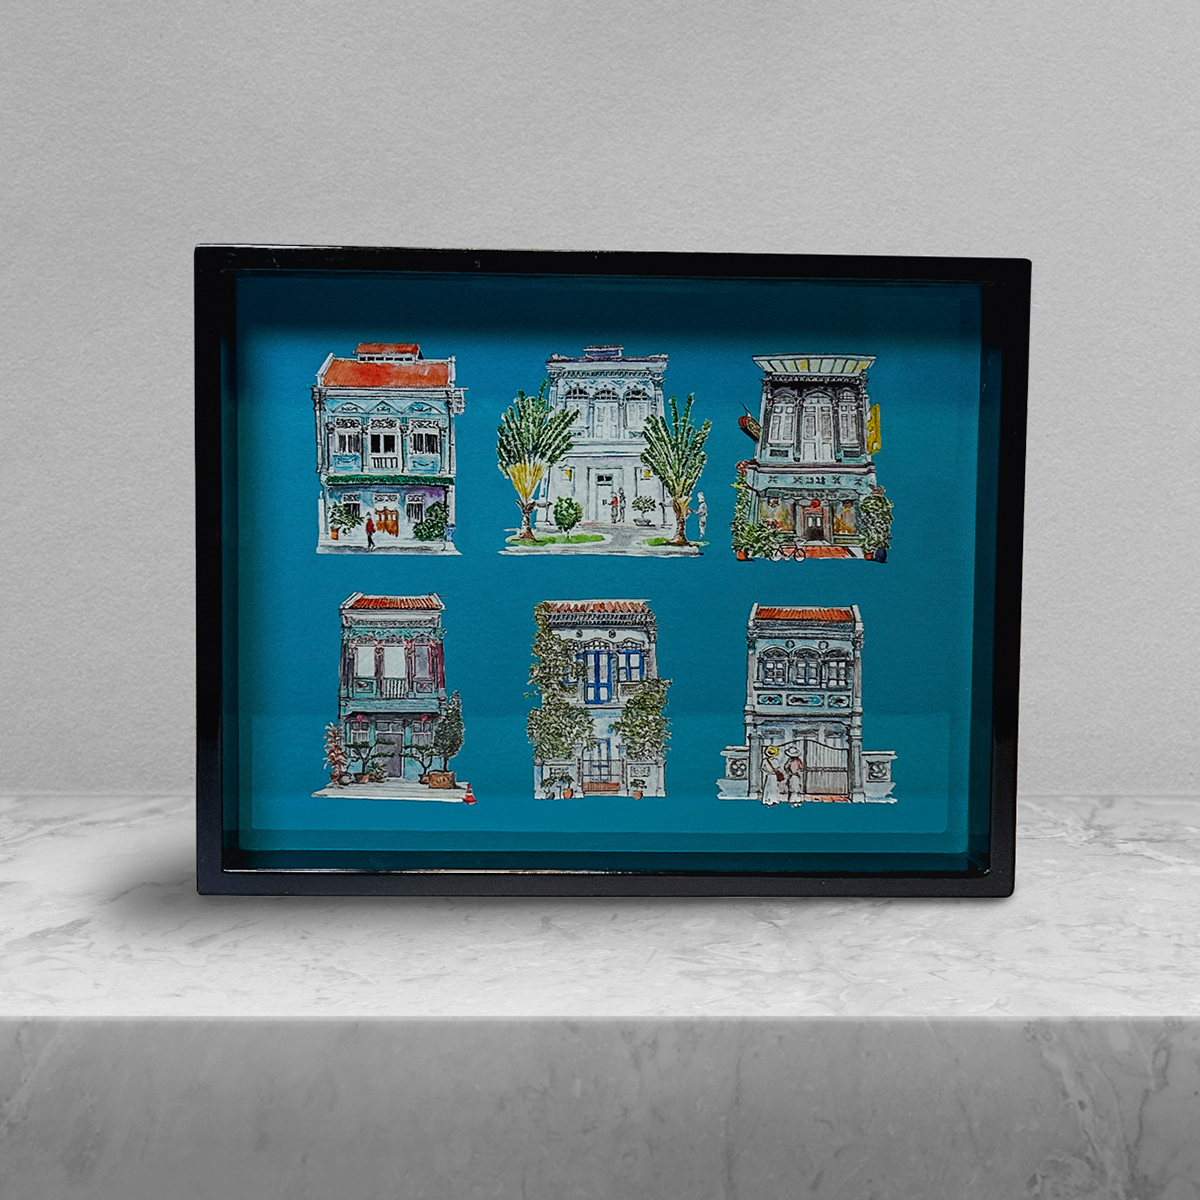 Singapore Themed Lacquer Trinket Tray - Turquoise Shophouses